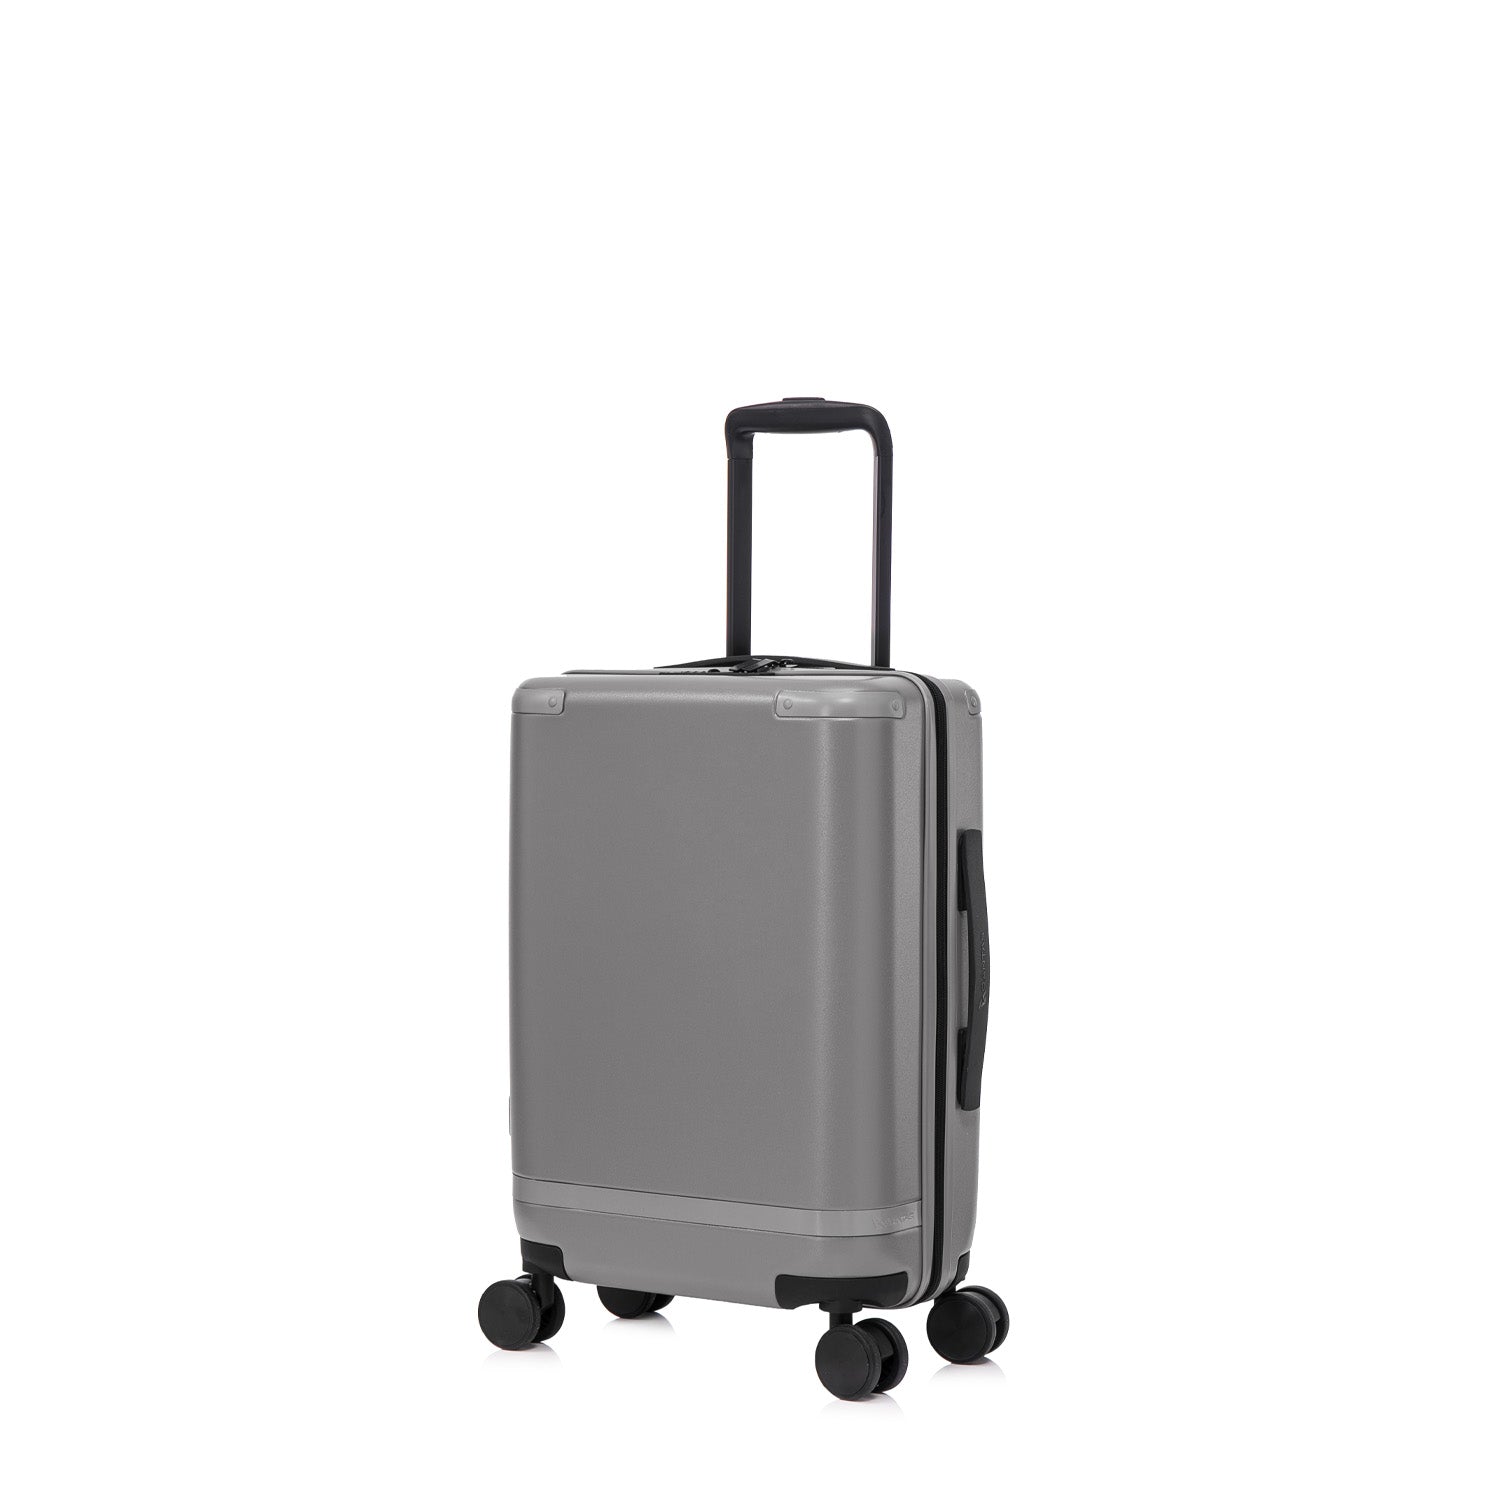 Qantas- QF250 ROME 56cm Small cabin spinner suitcase - Charcoal-3